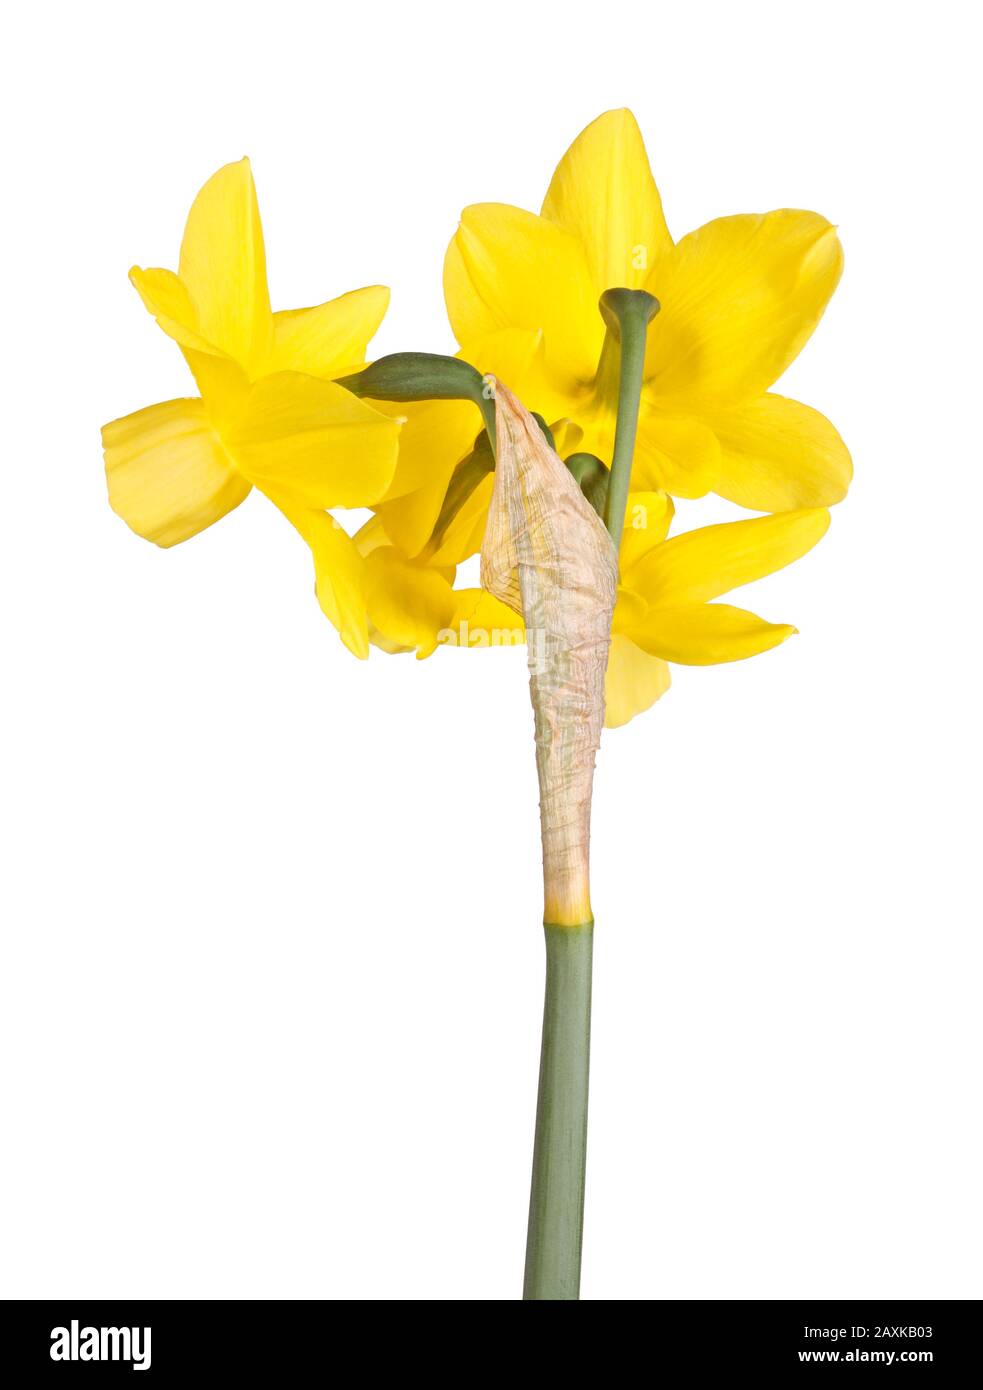 Back view of stem with four yellow flowers of a Narcissus triandrus daffodil hybrid cultivar isolated against a white background Stock Photo